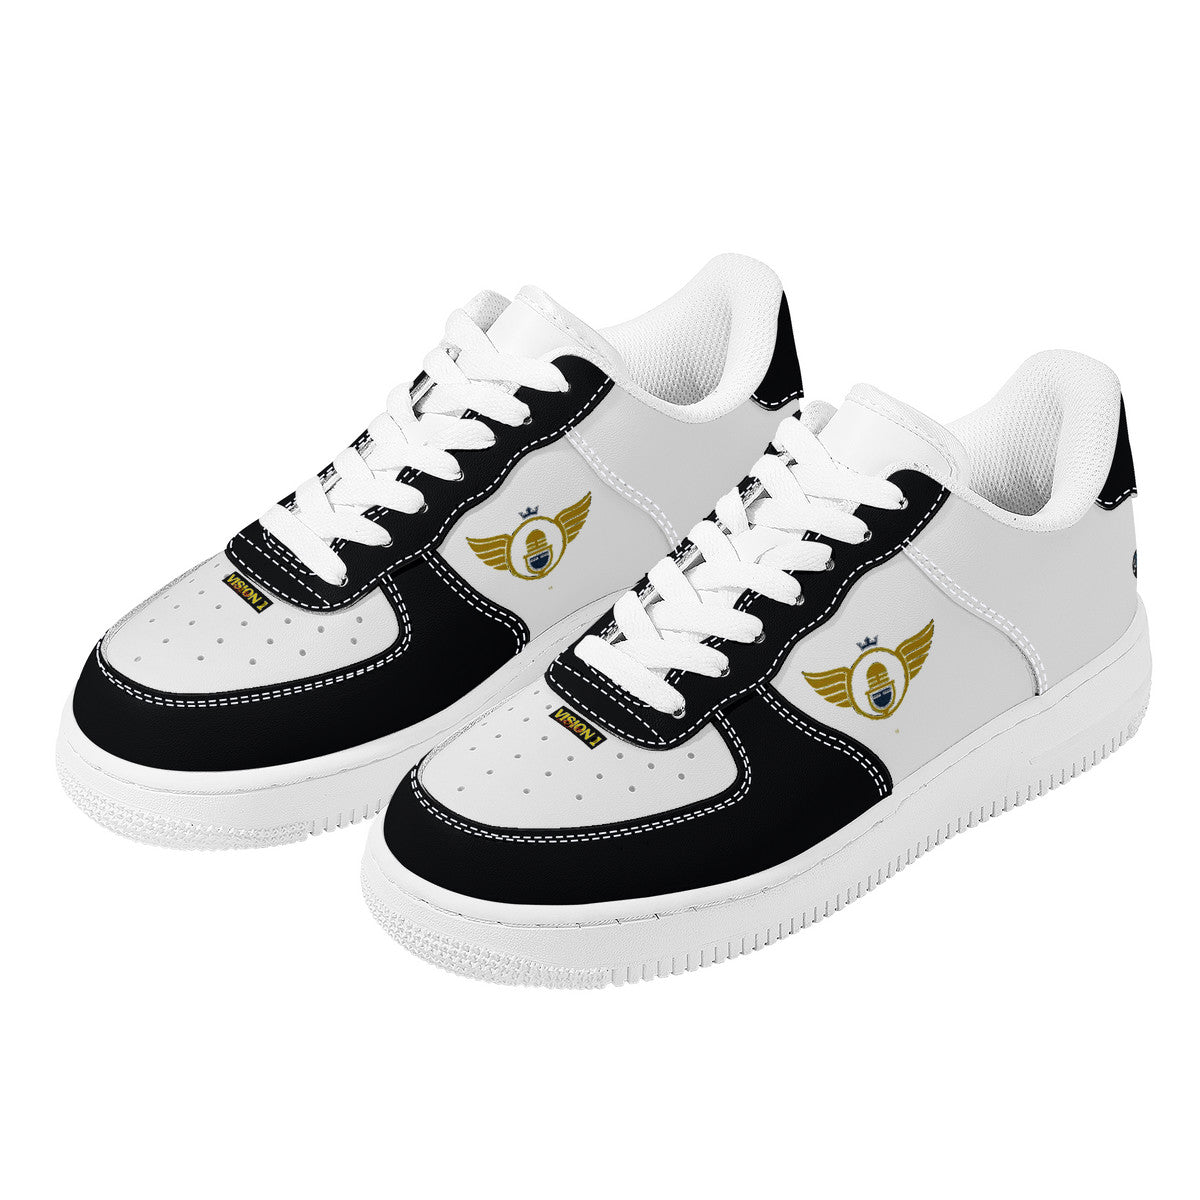 Gold Series - Black Accents | Low Top Customized | Shoe Zero